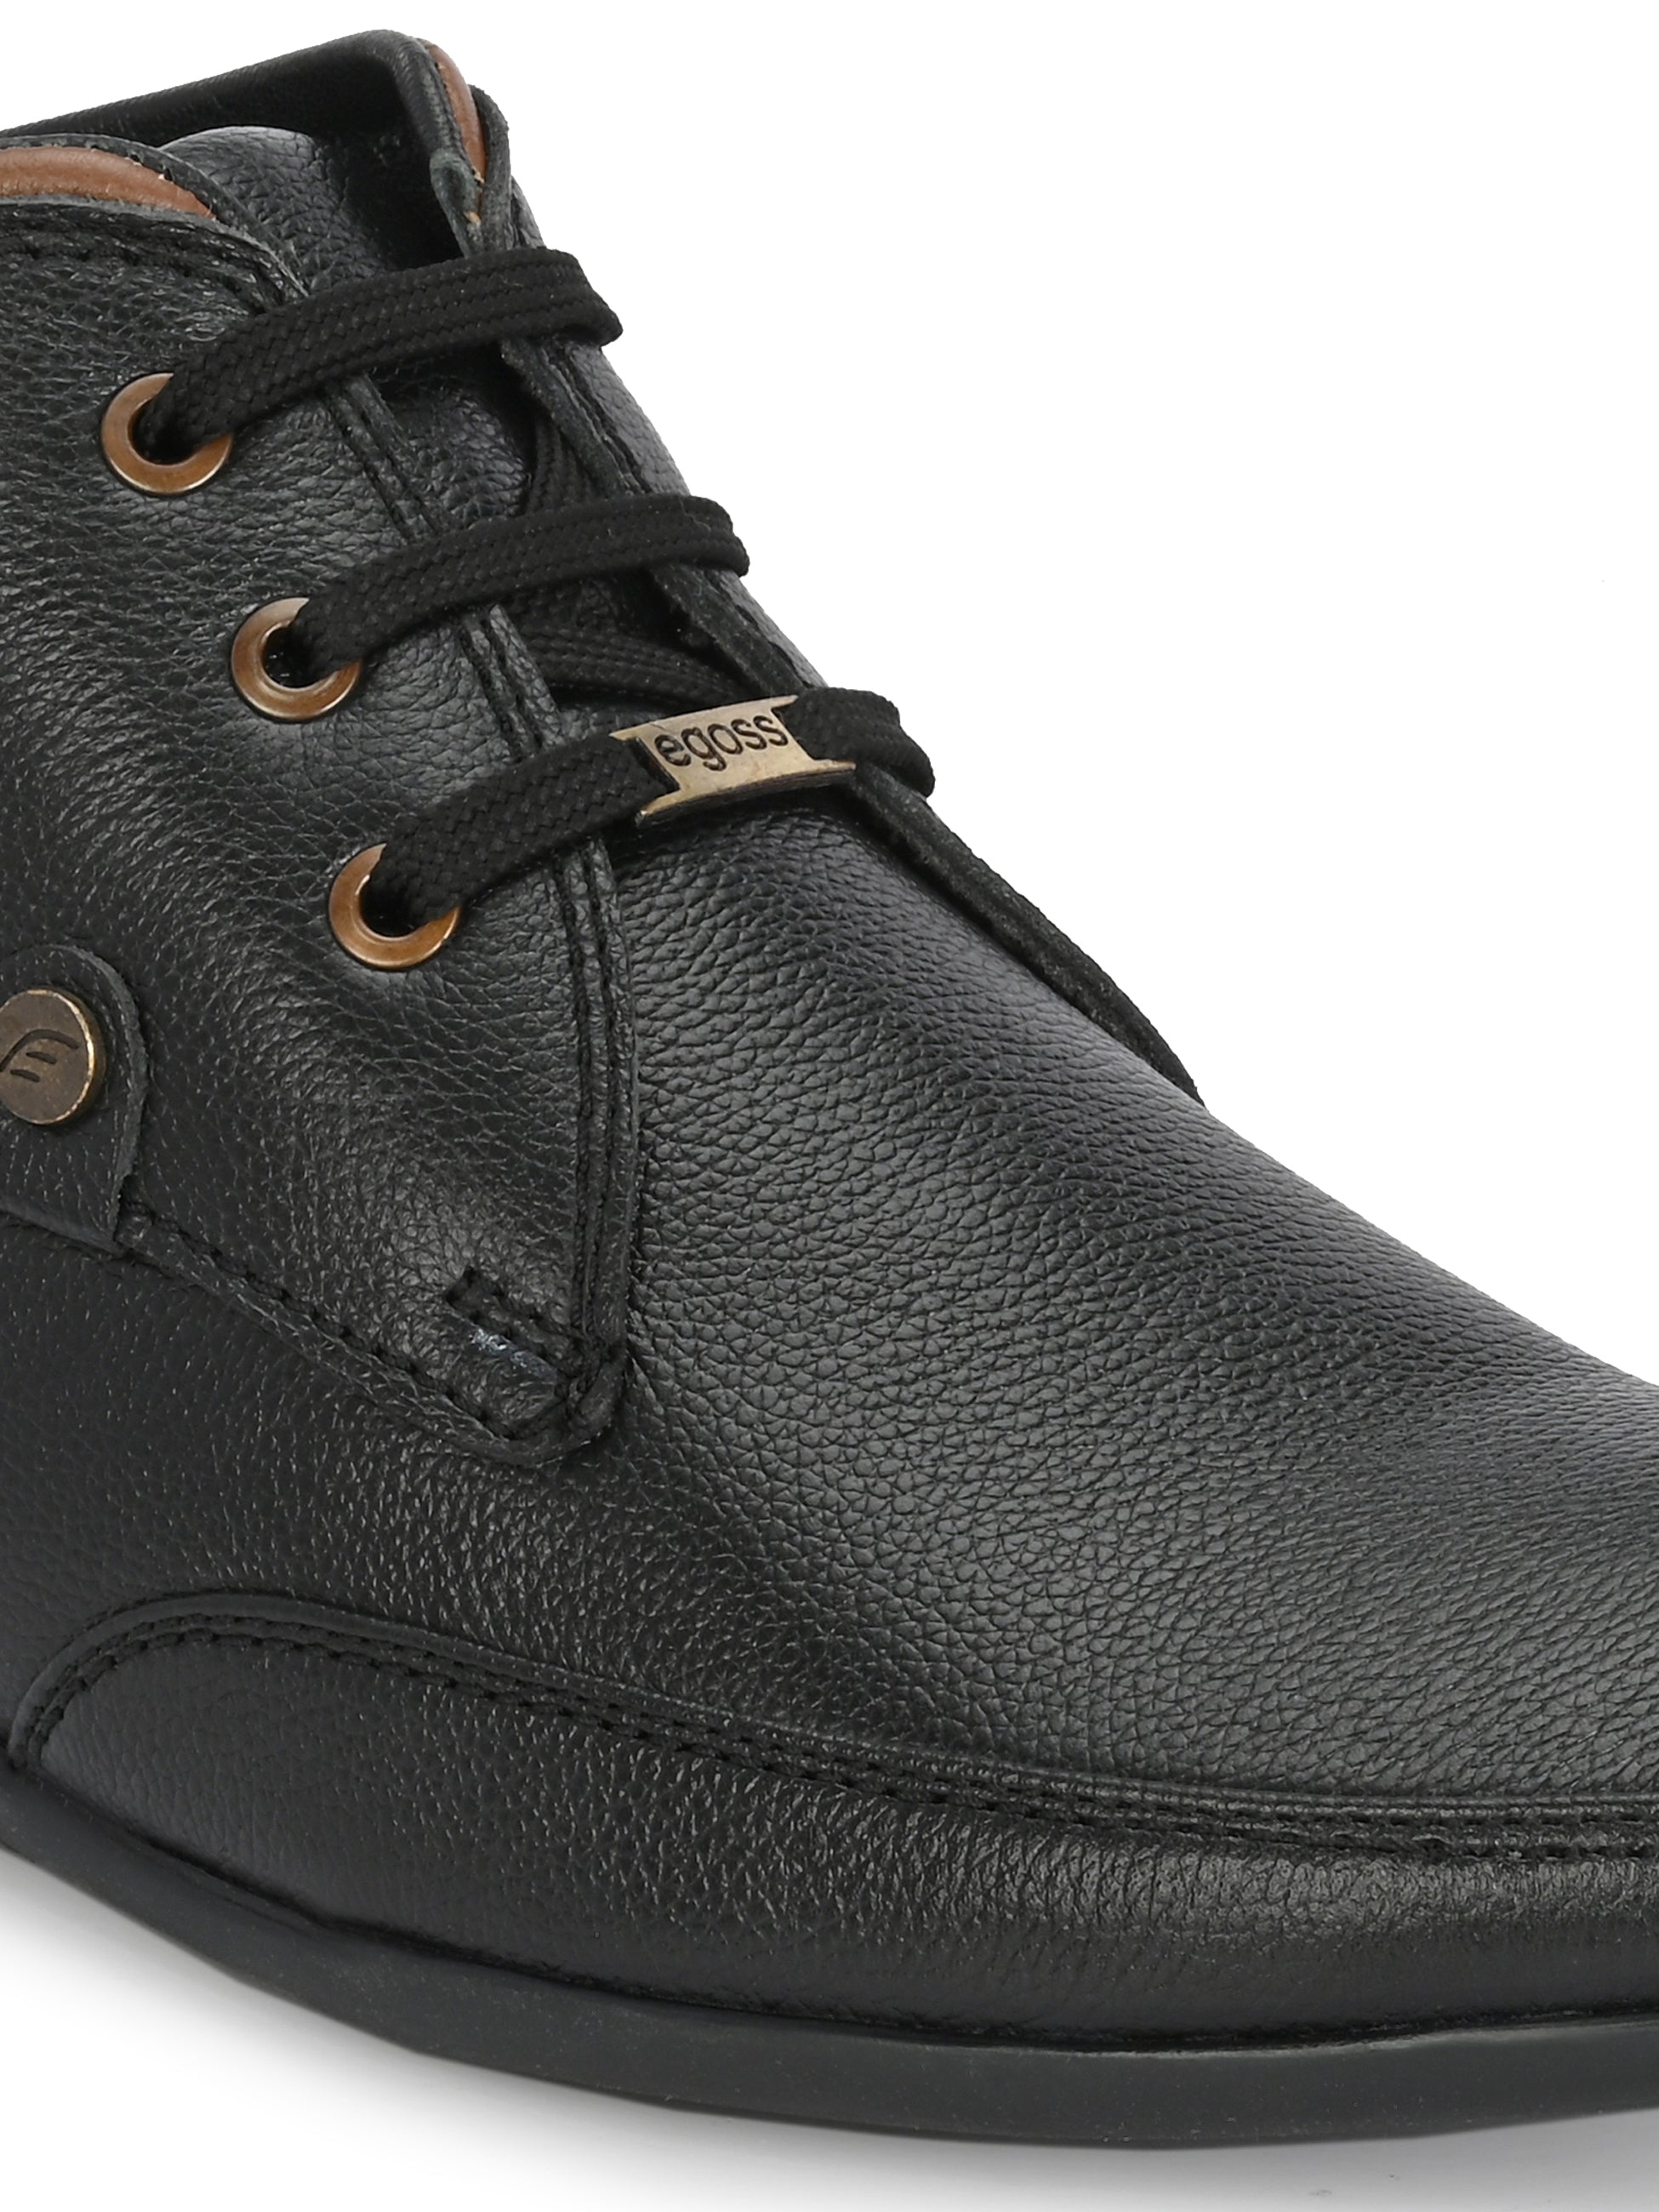 Egoss Leather Casual Boots For Men